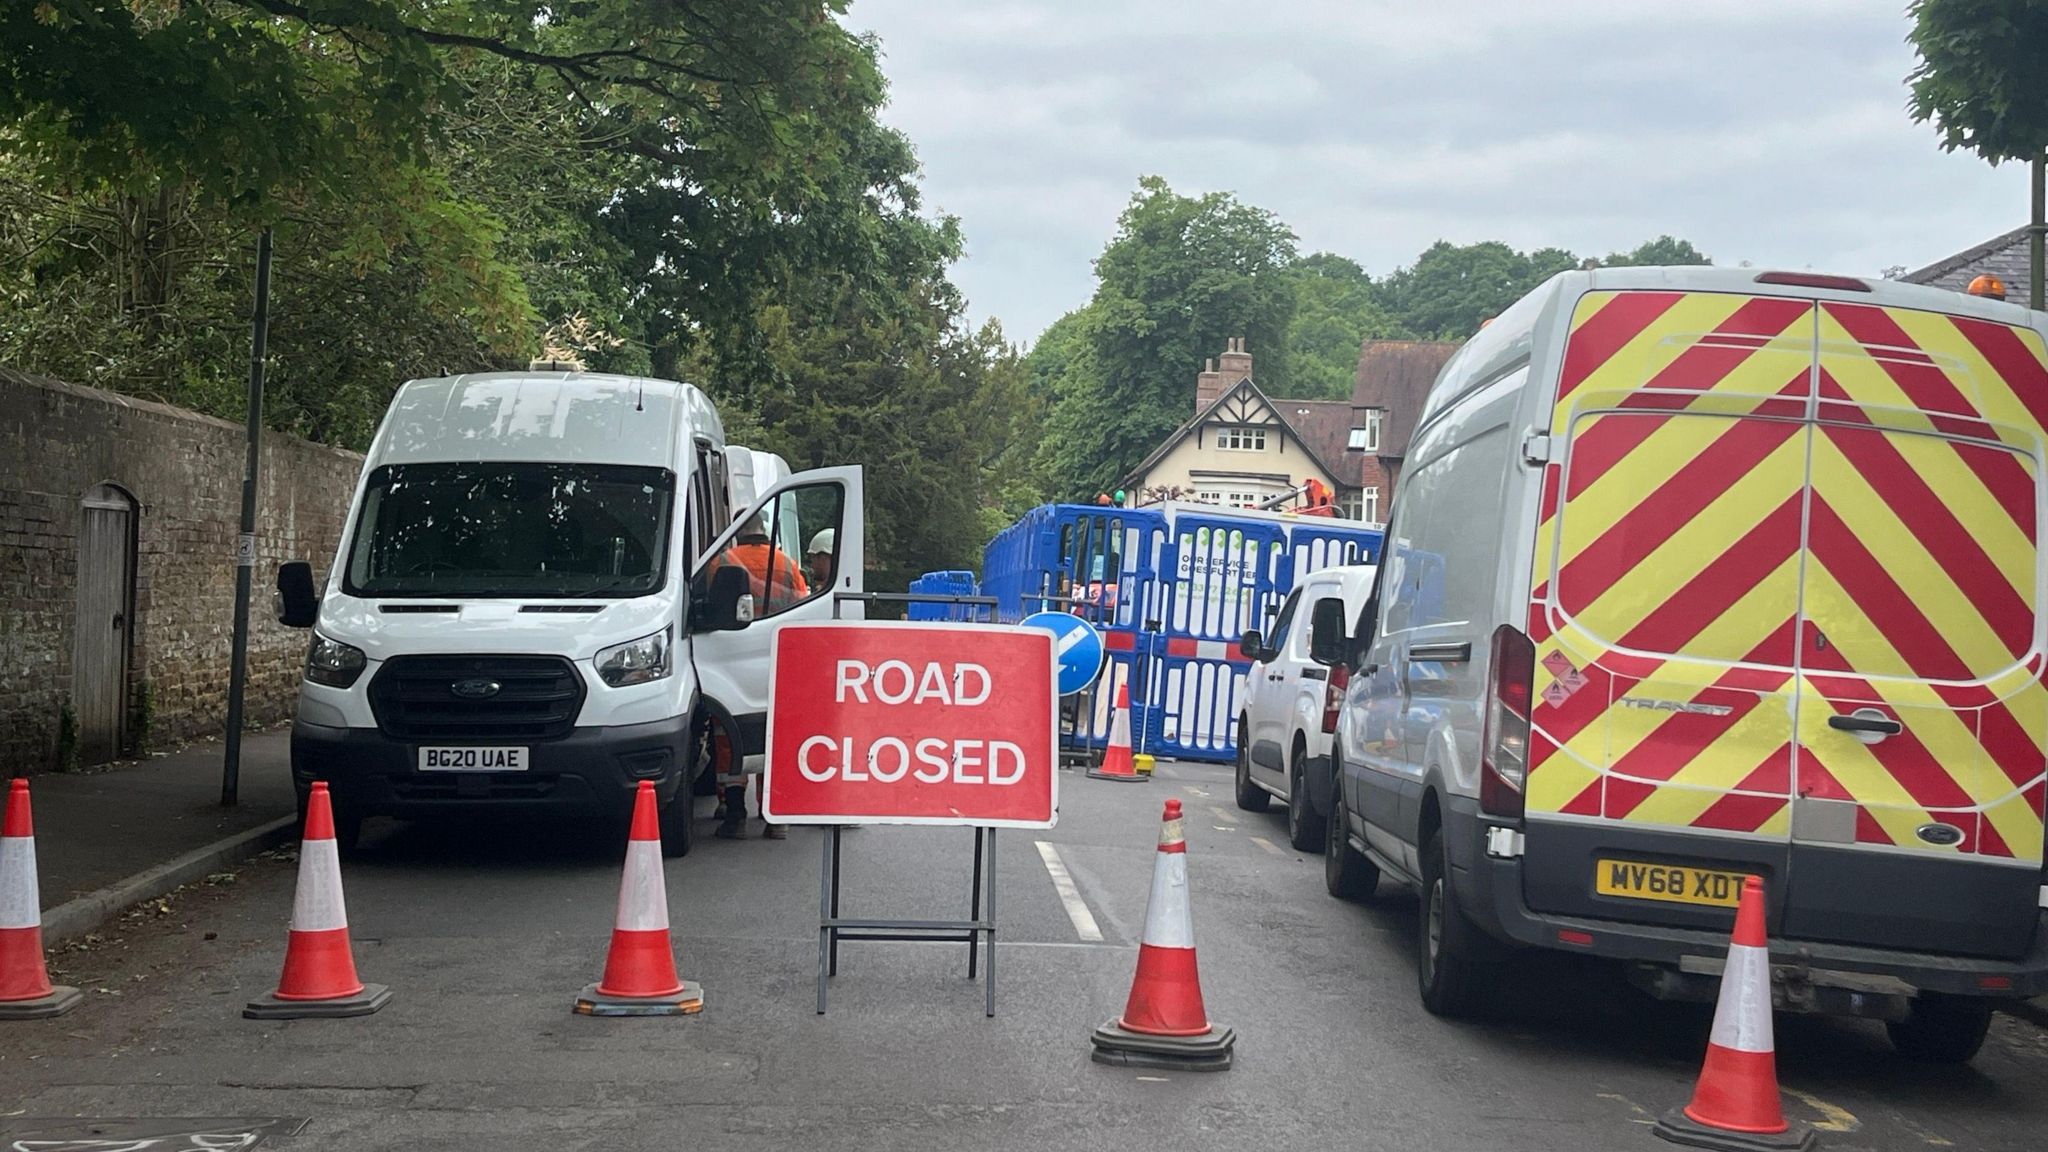 Station Road in Bramley closed for roadworks